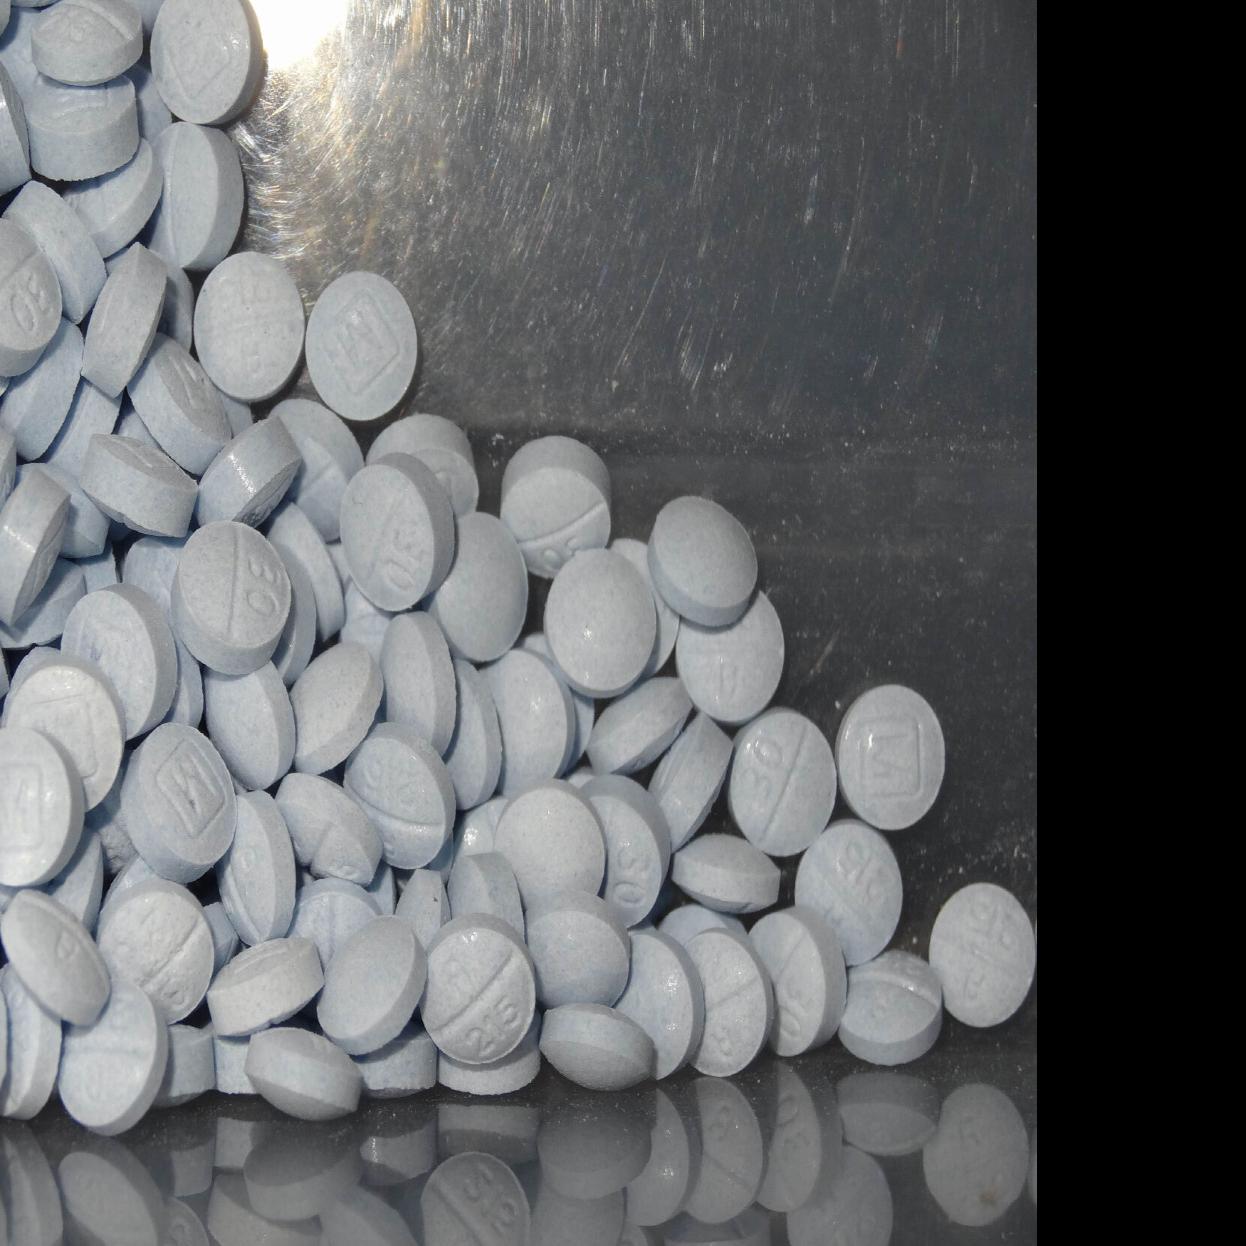 South Carolina town warns of fentanyl marked as oxycodone pills